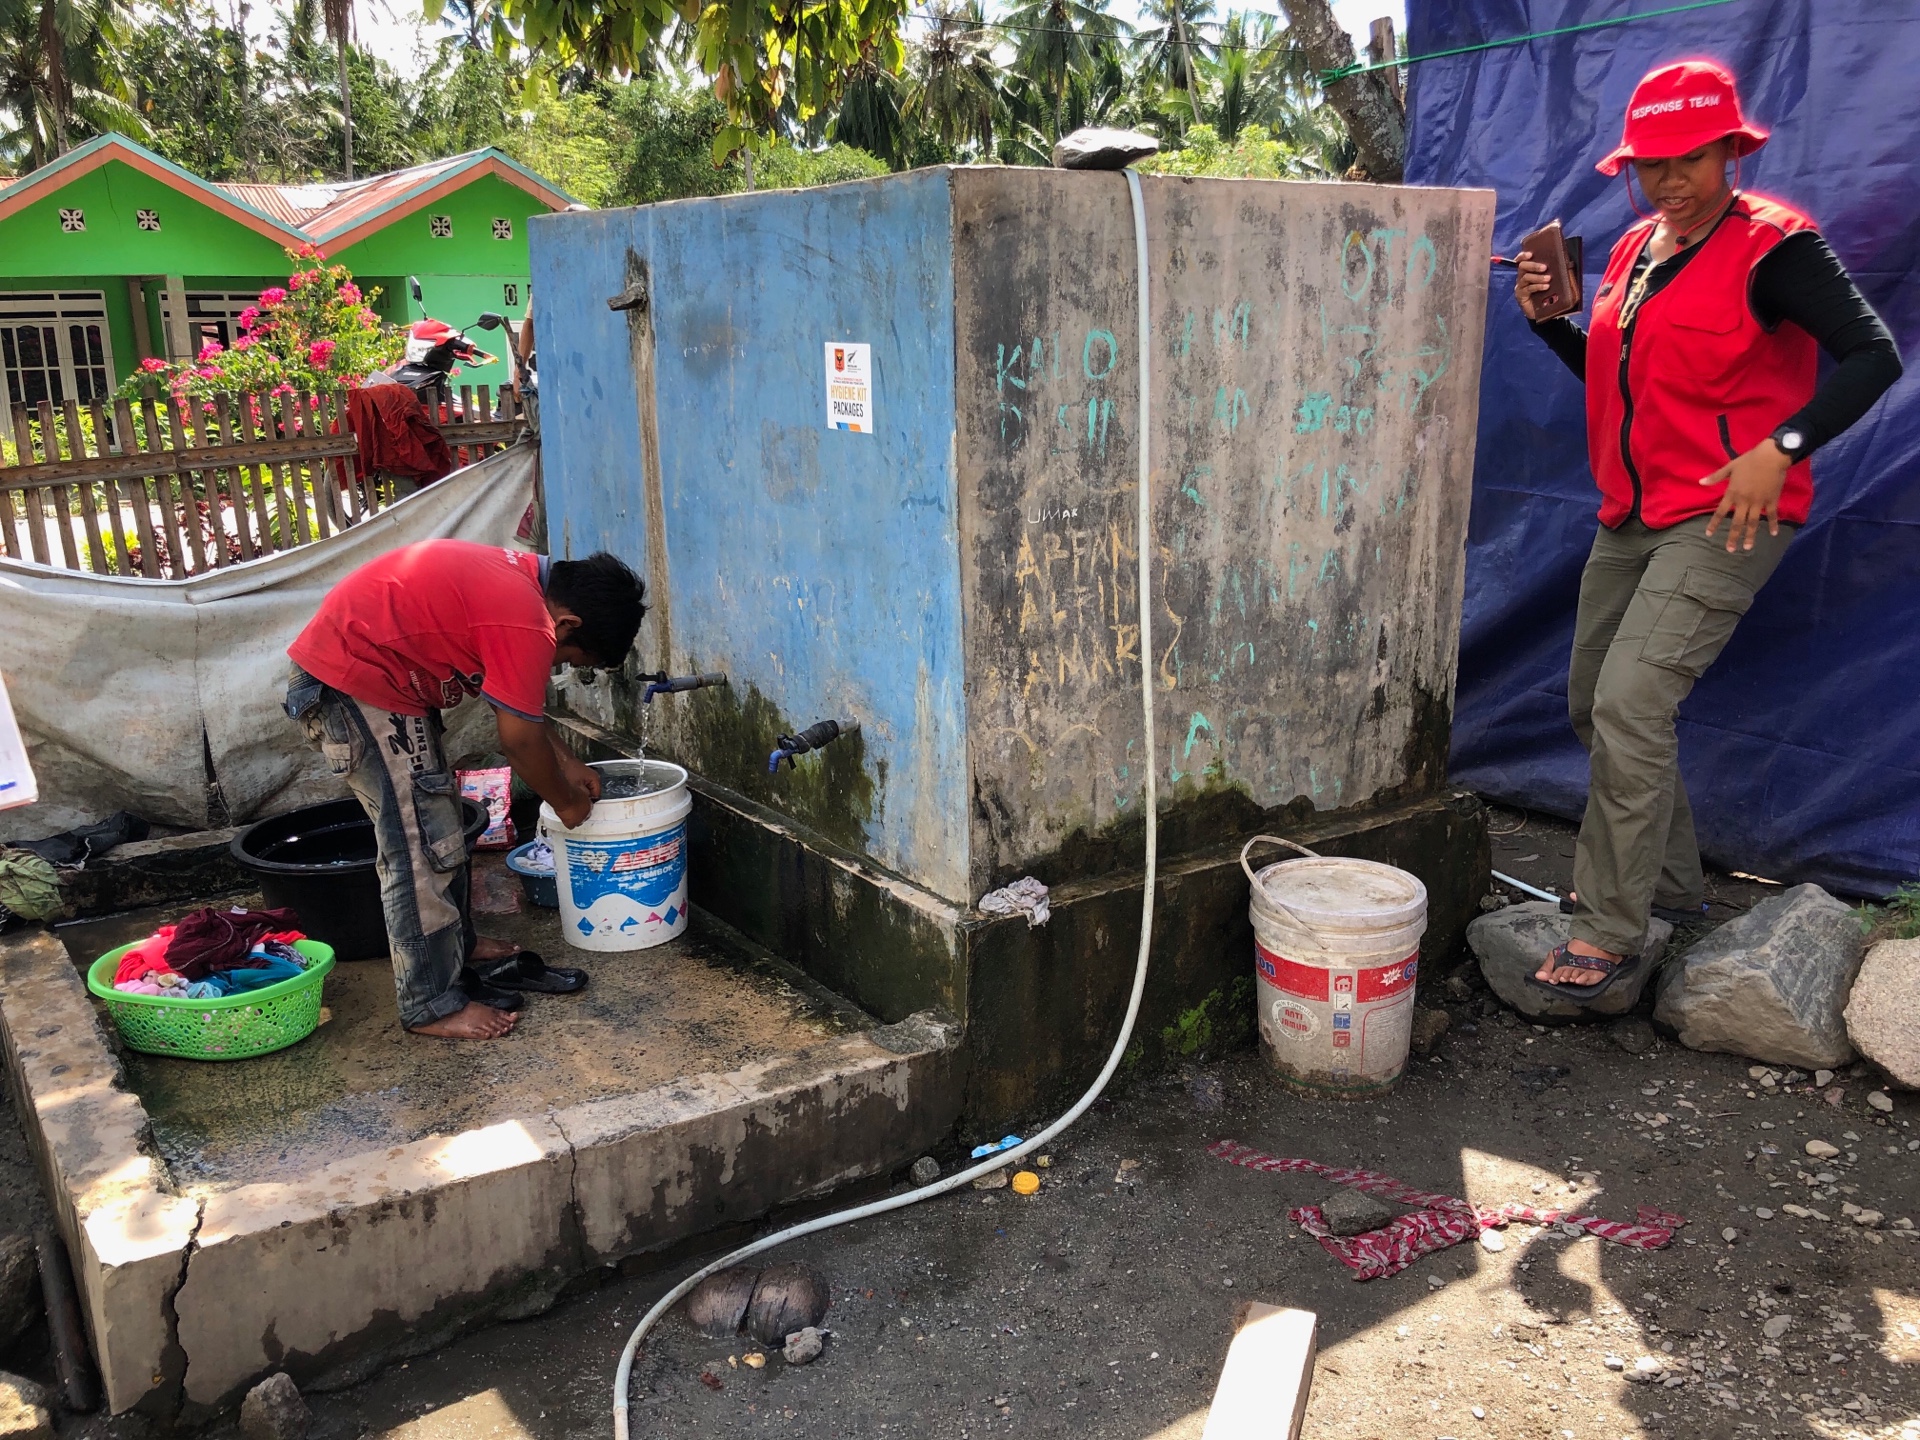 Starting from water on the road to reconstruction in central Sulawesi, Indonesia